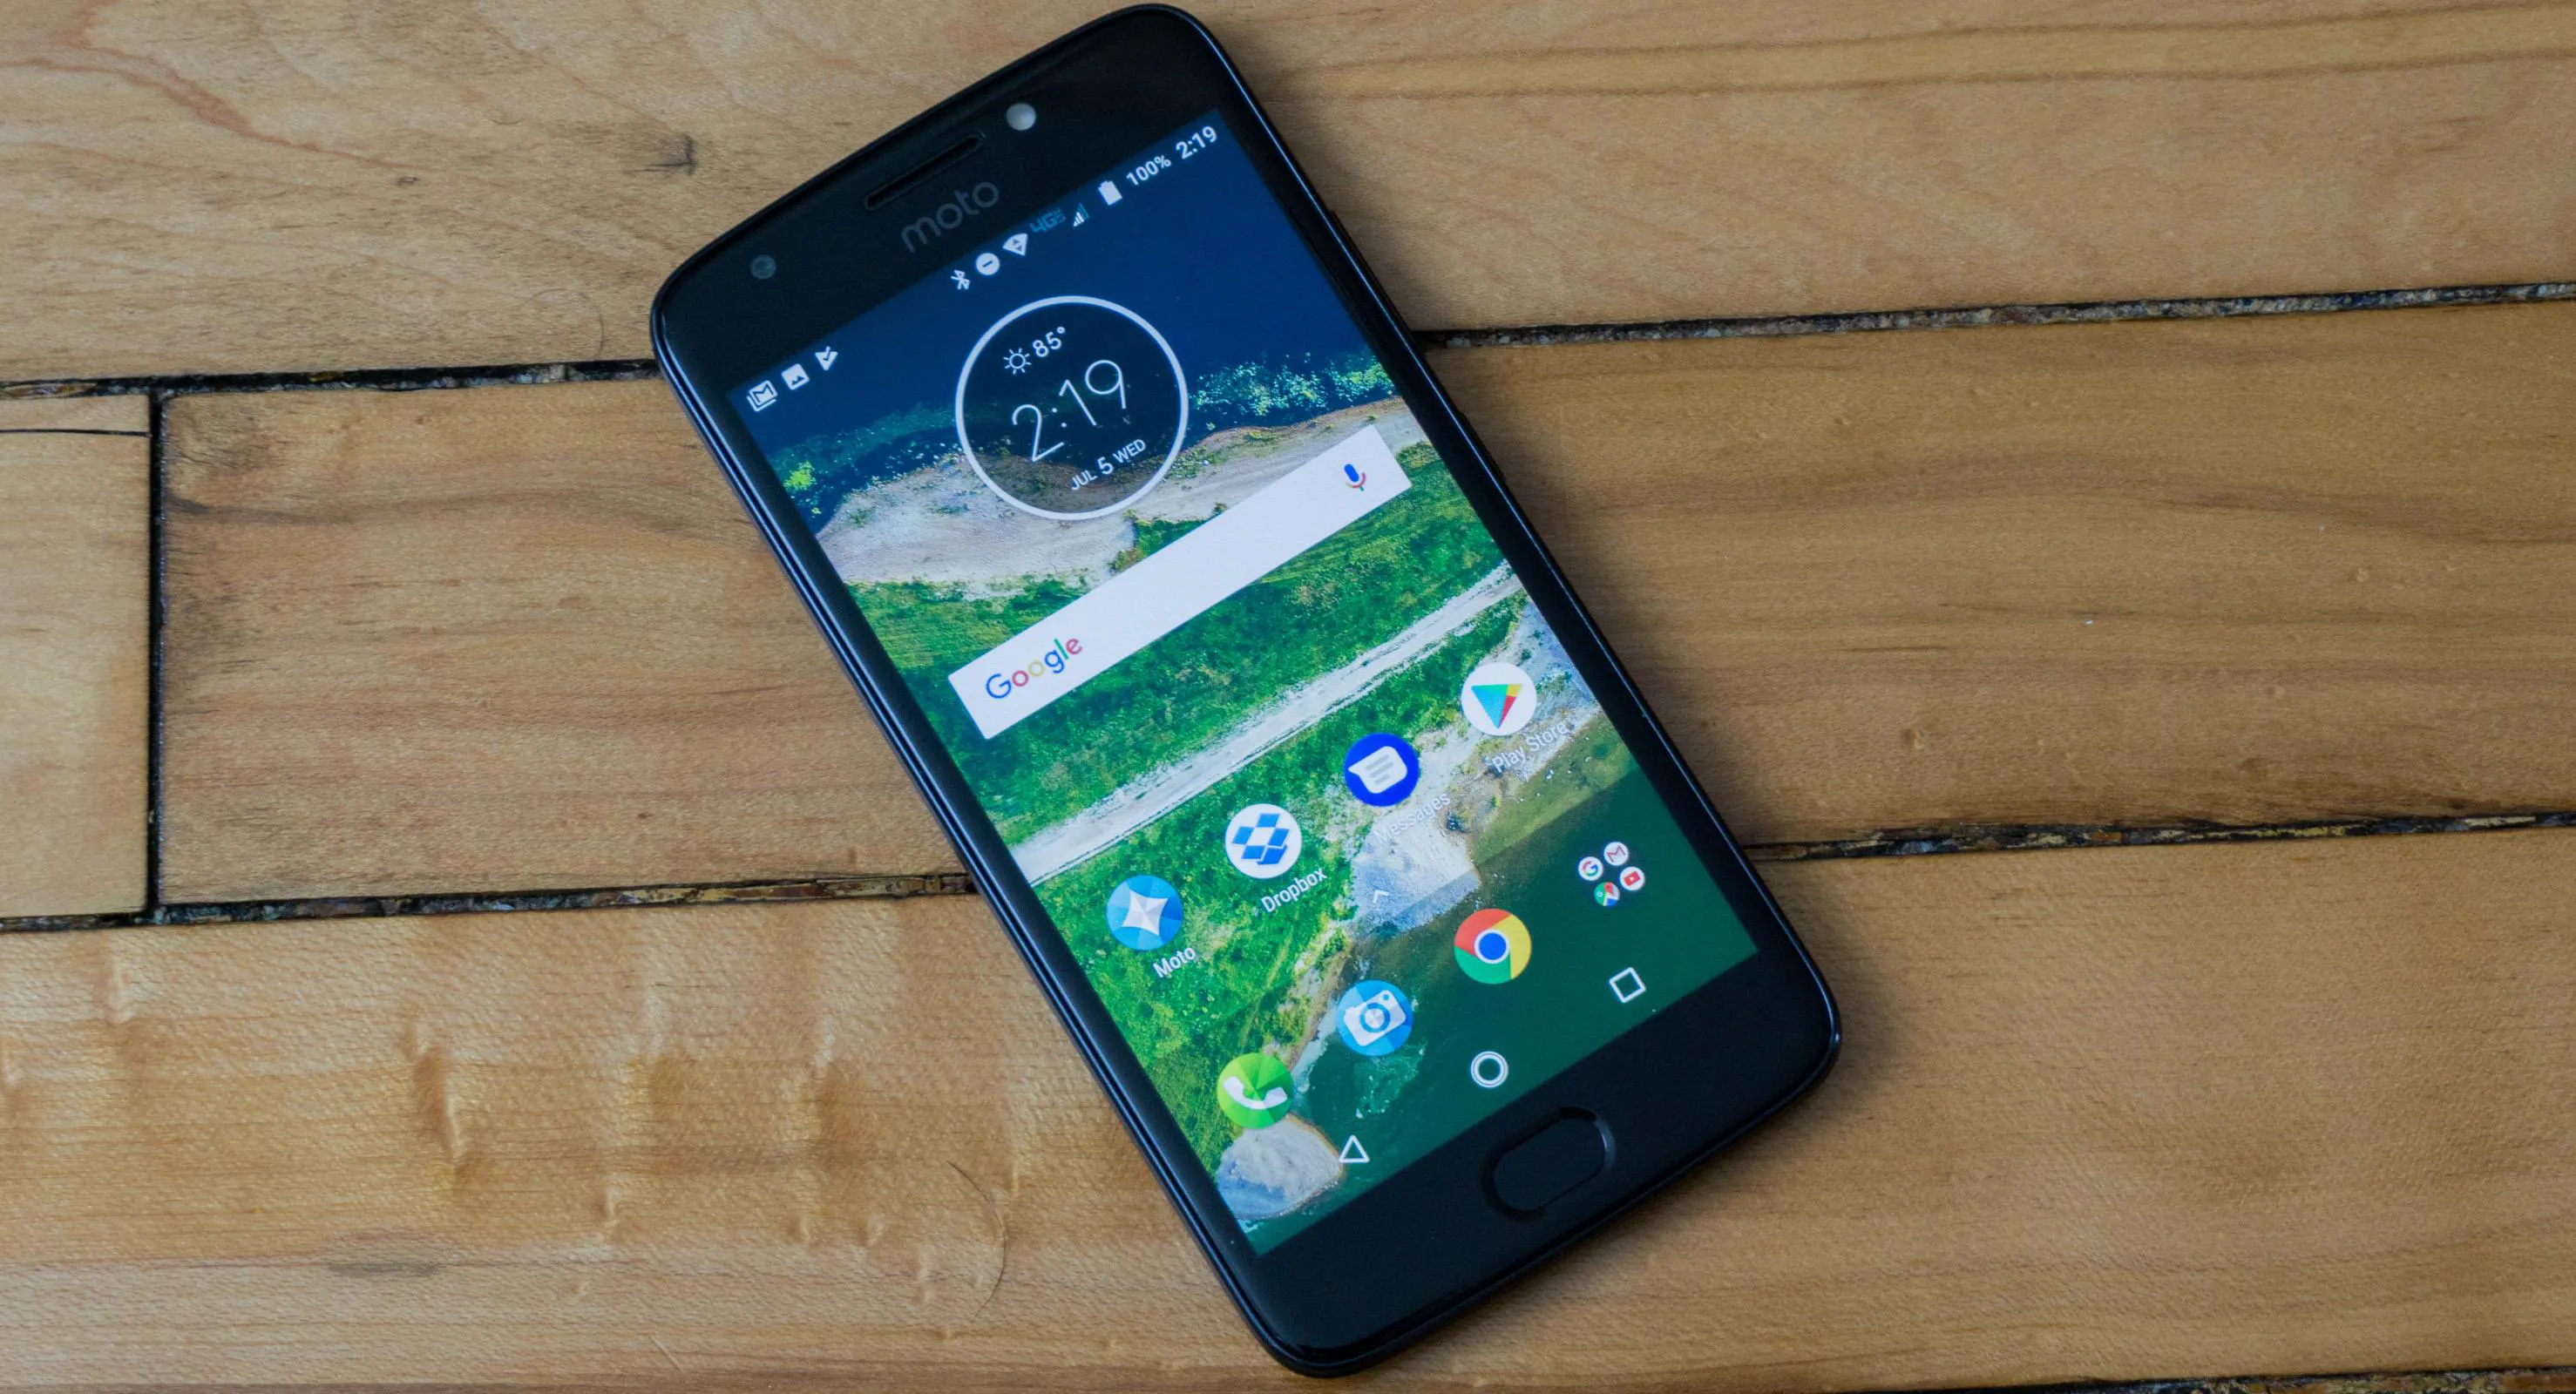 Motorola moto e4 available in excellent condition with an adjustable appropriate price - photo 2